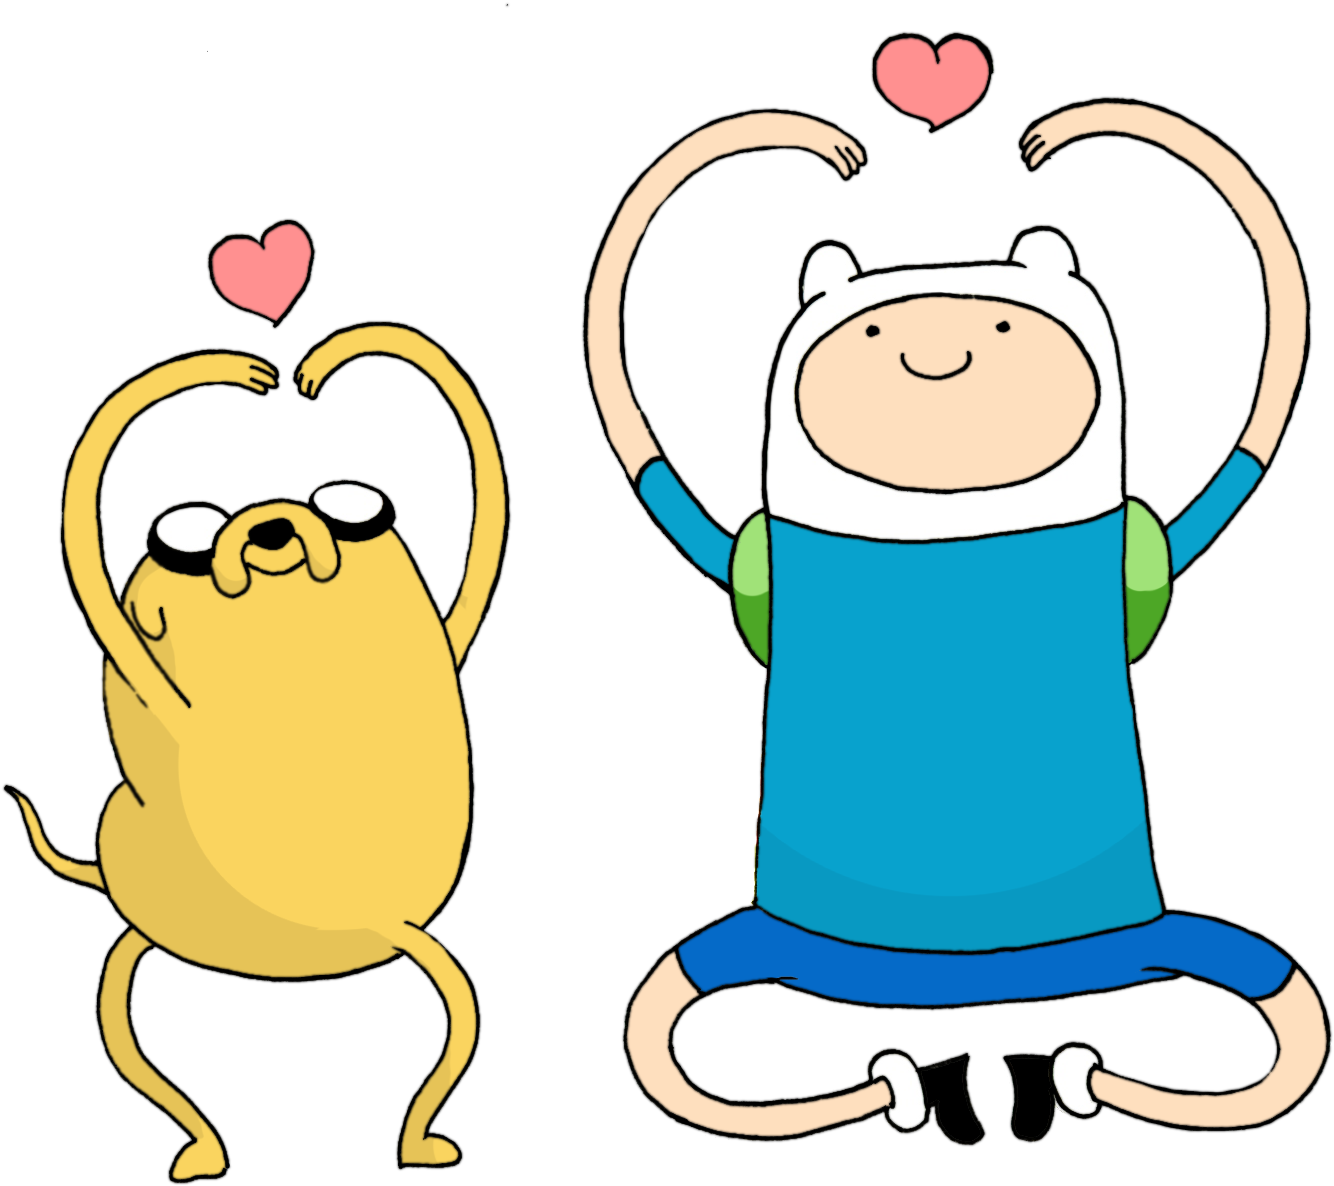 Adventure Time Finnand Jake Friendship PNG